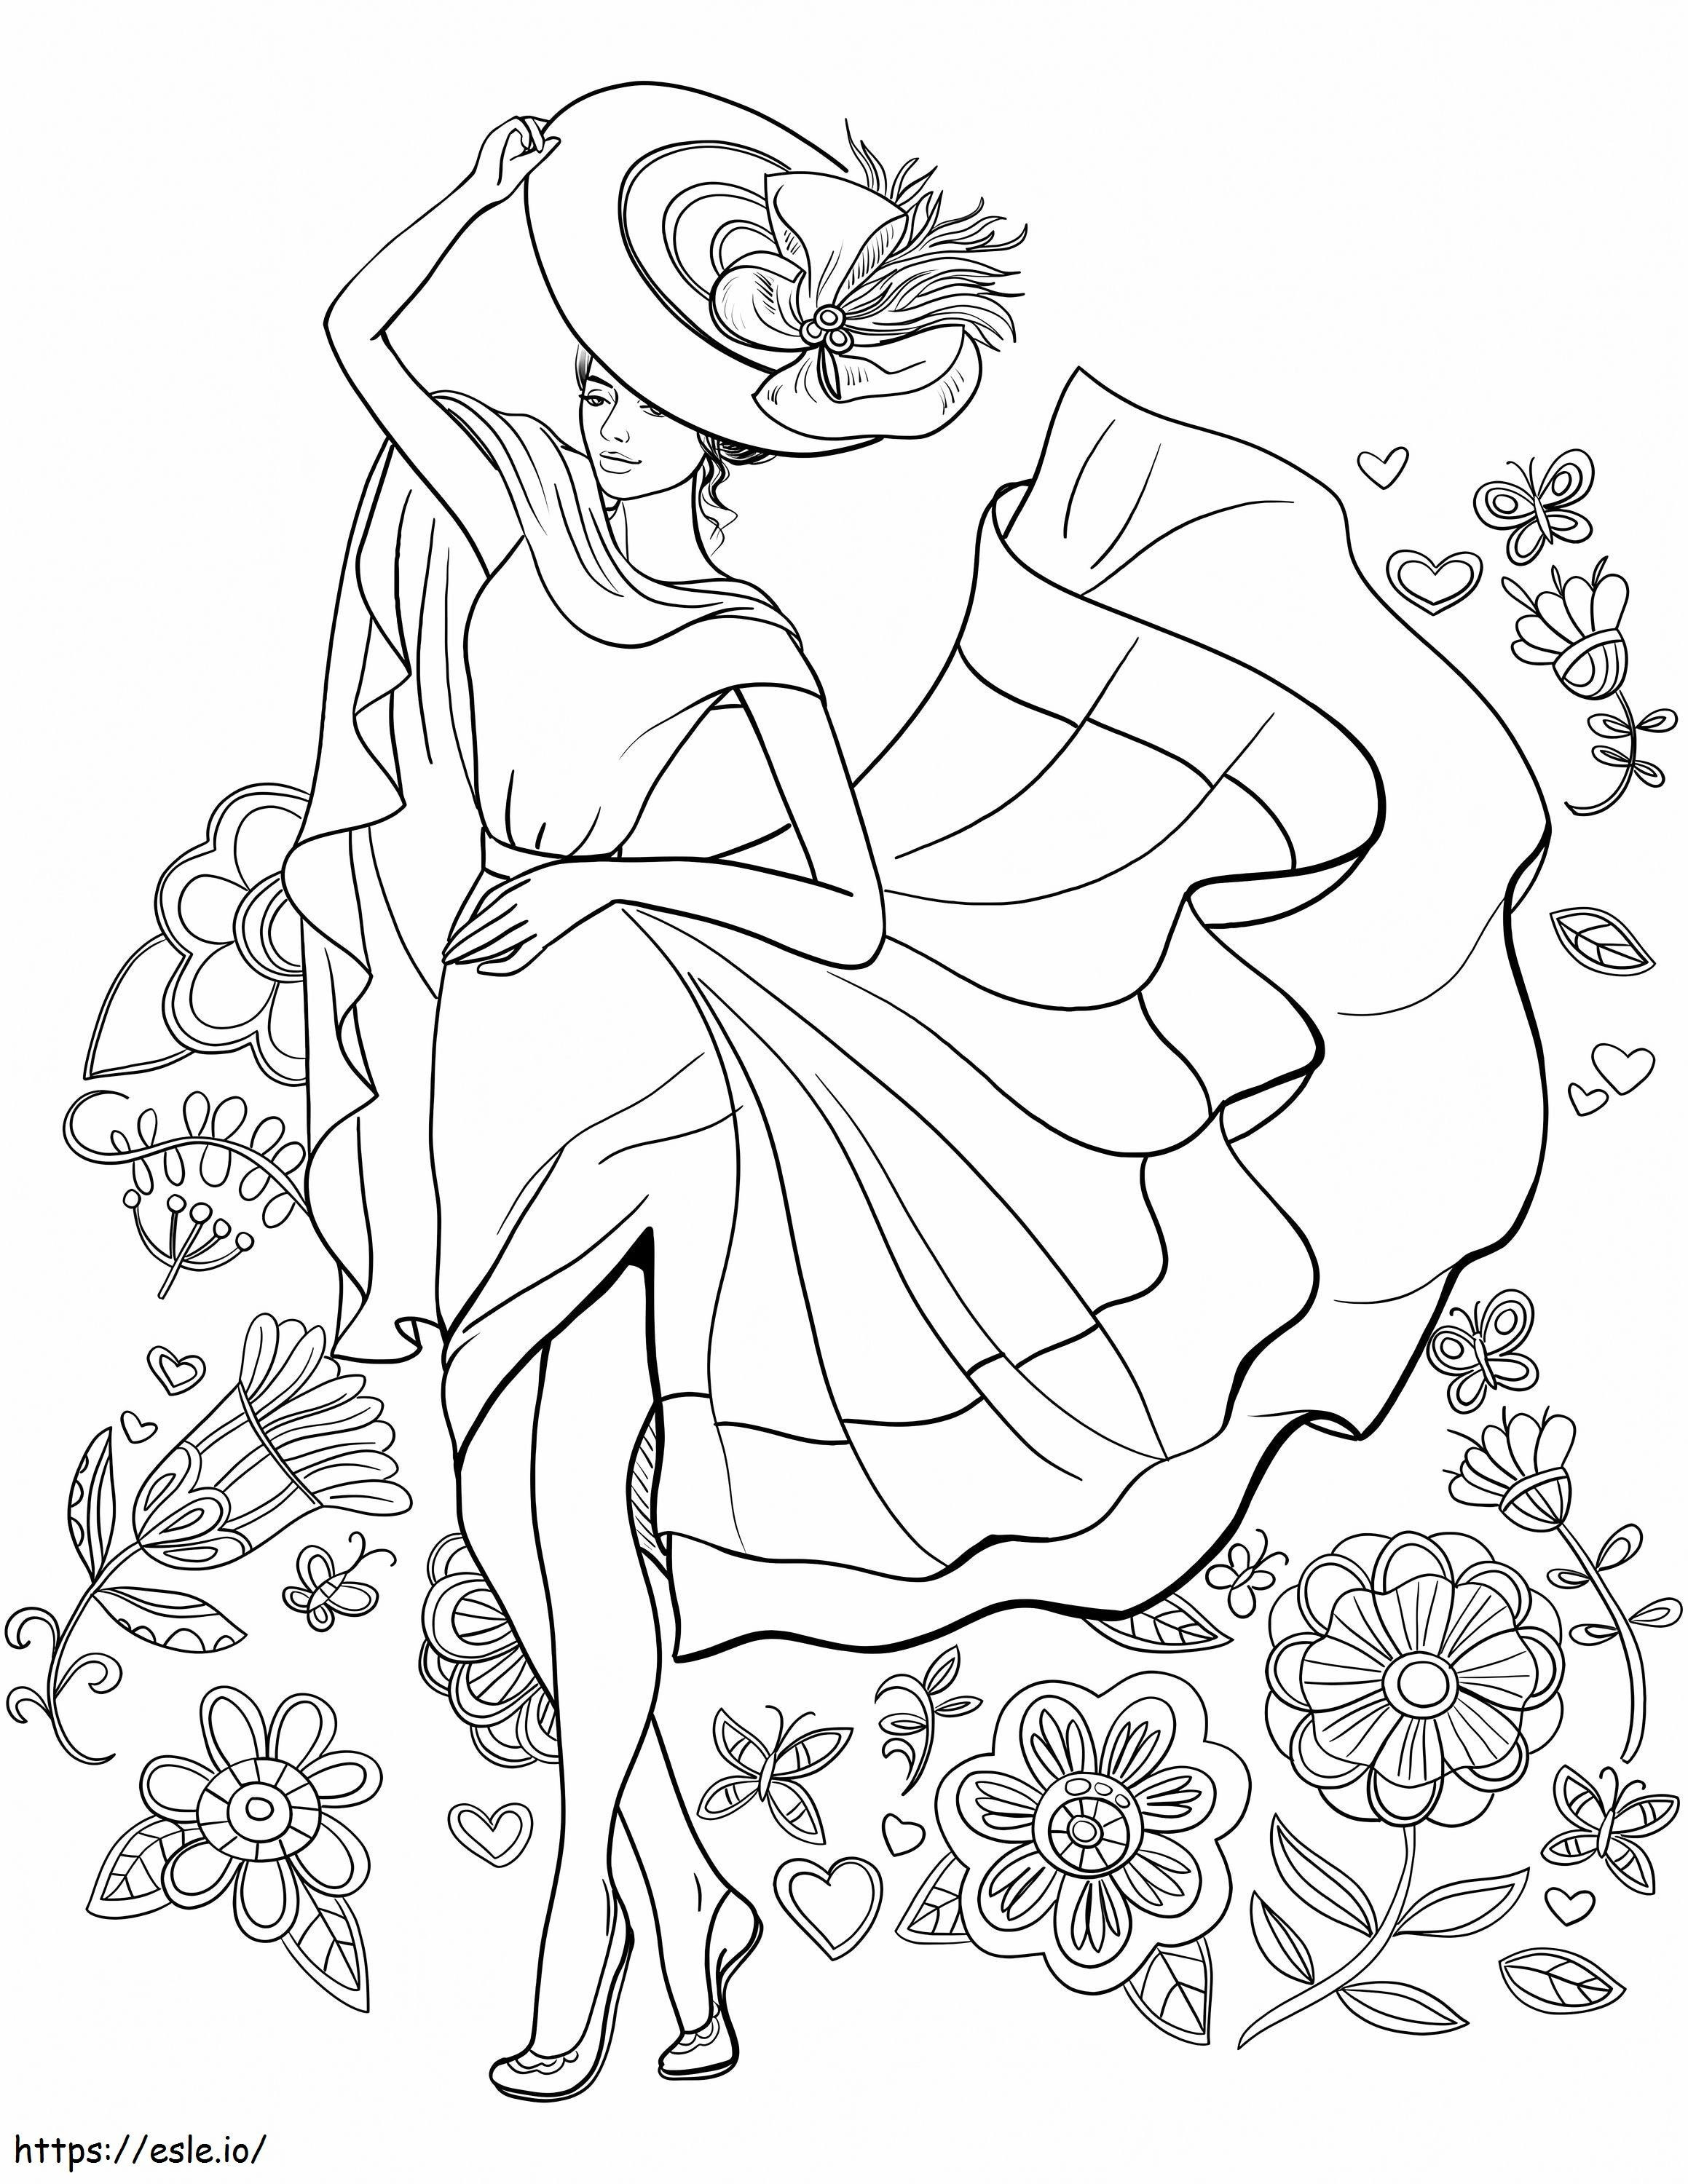 1572828316 Lady Pin Up coloring page